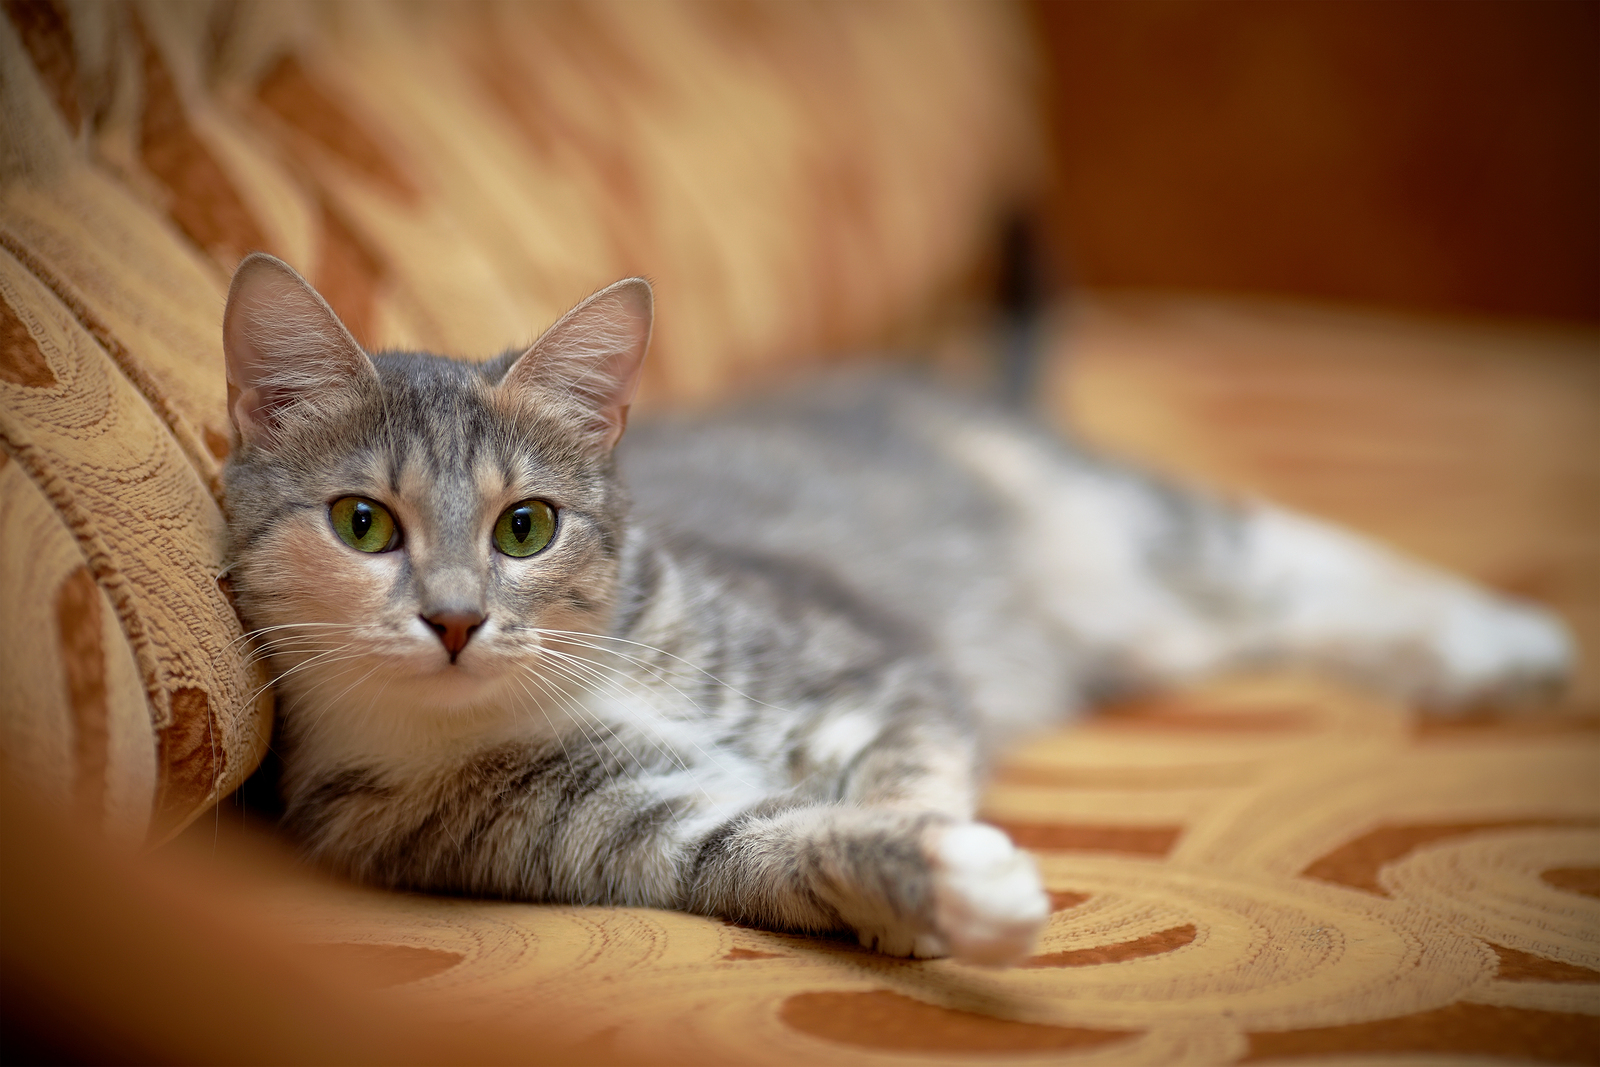 uploads/mvp/5/50/the-gray-cat-with-green-eyes-lies-on-a-sofa-347812-ref.jpg